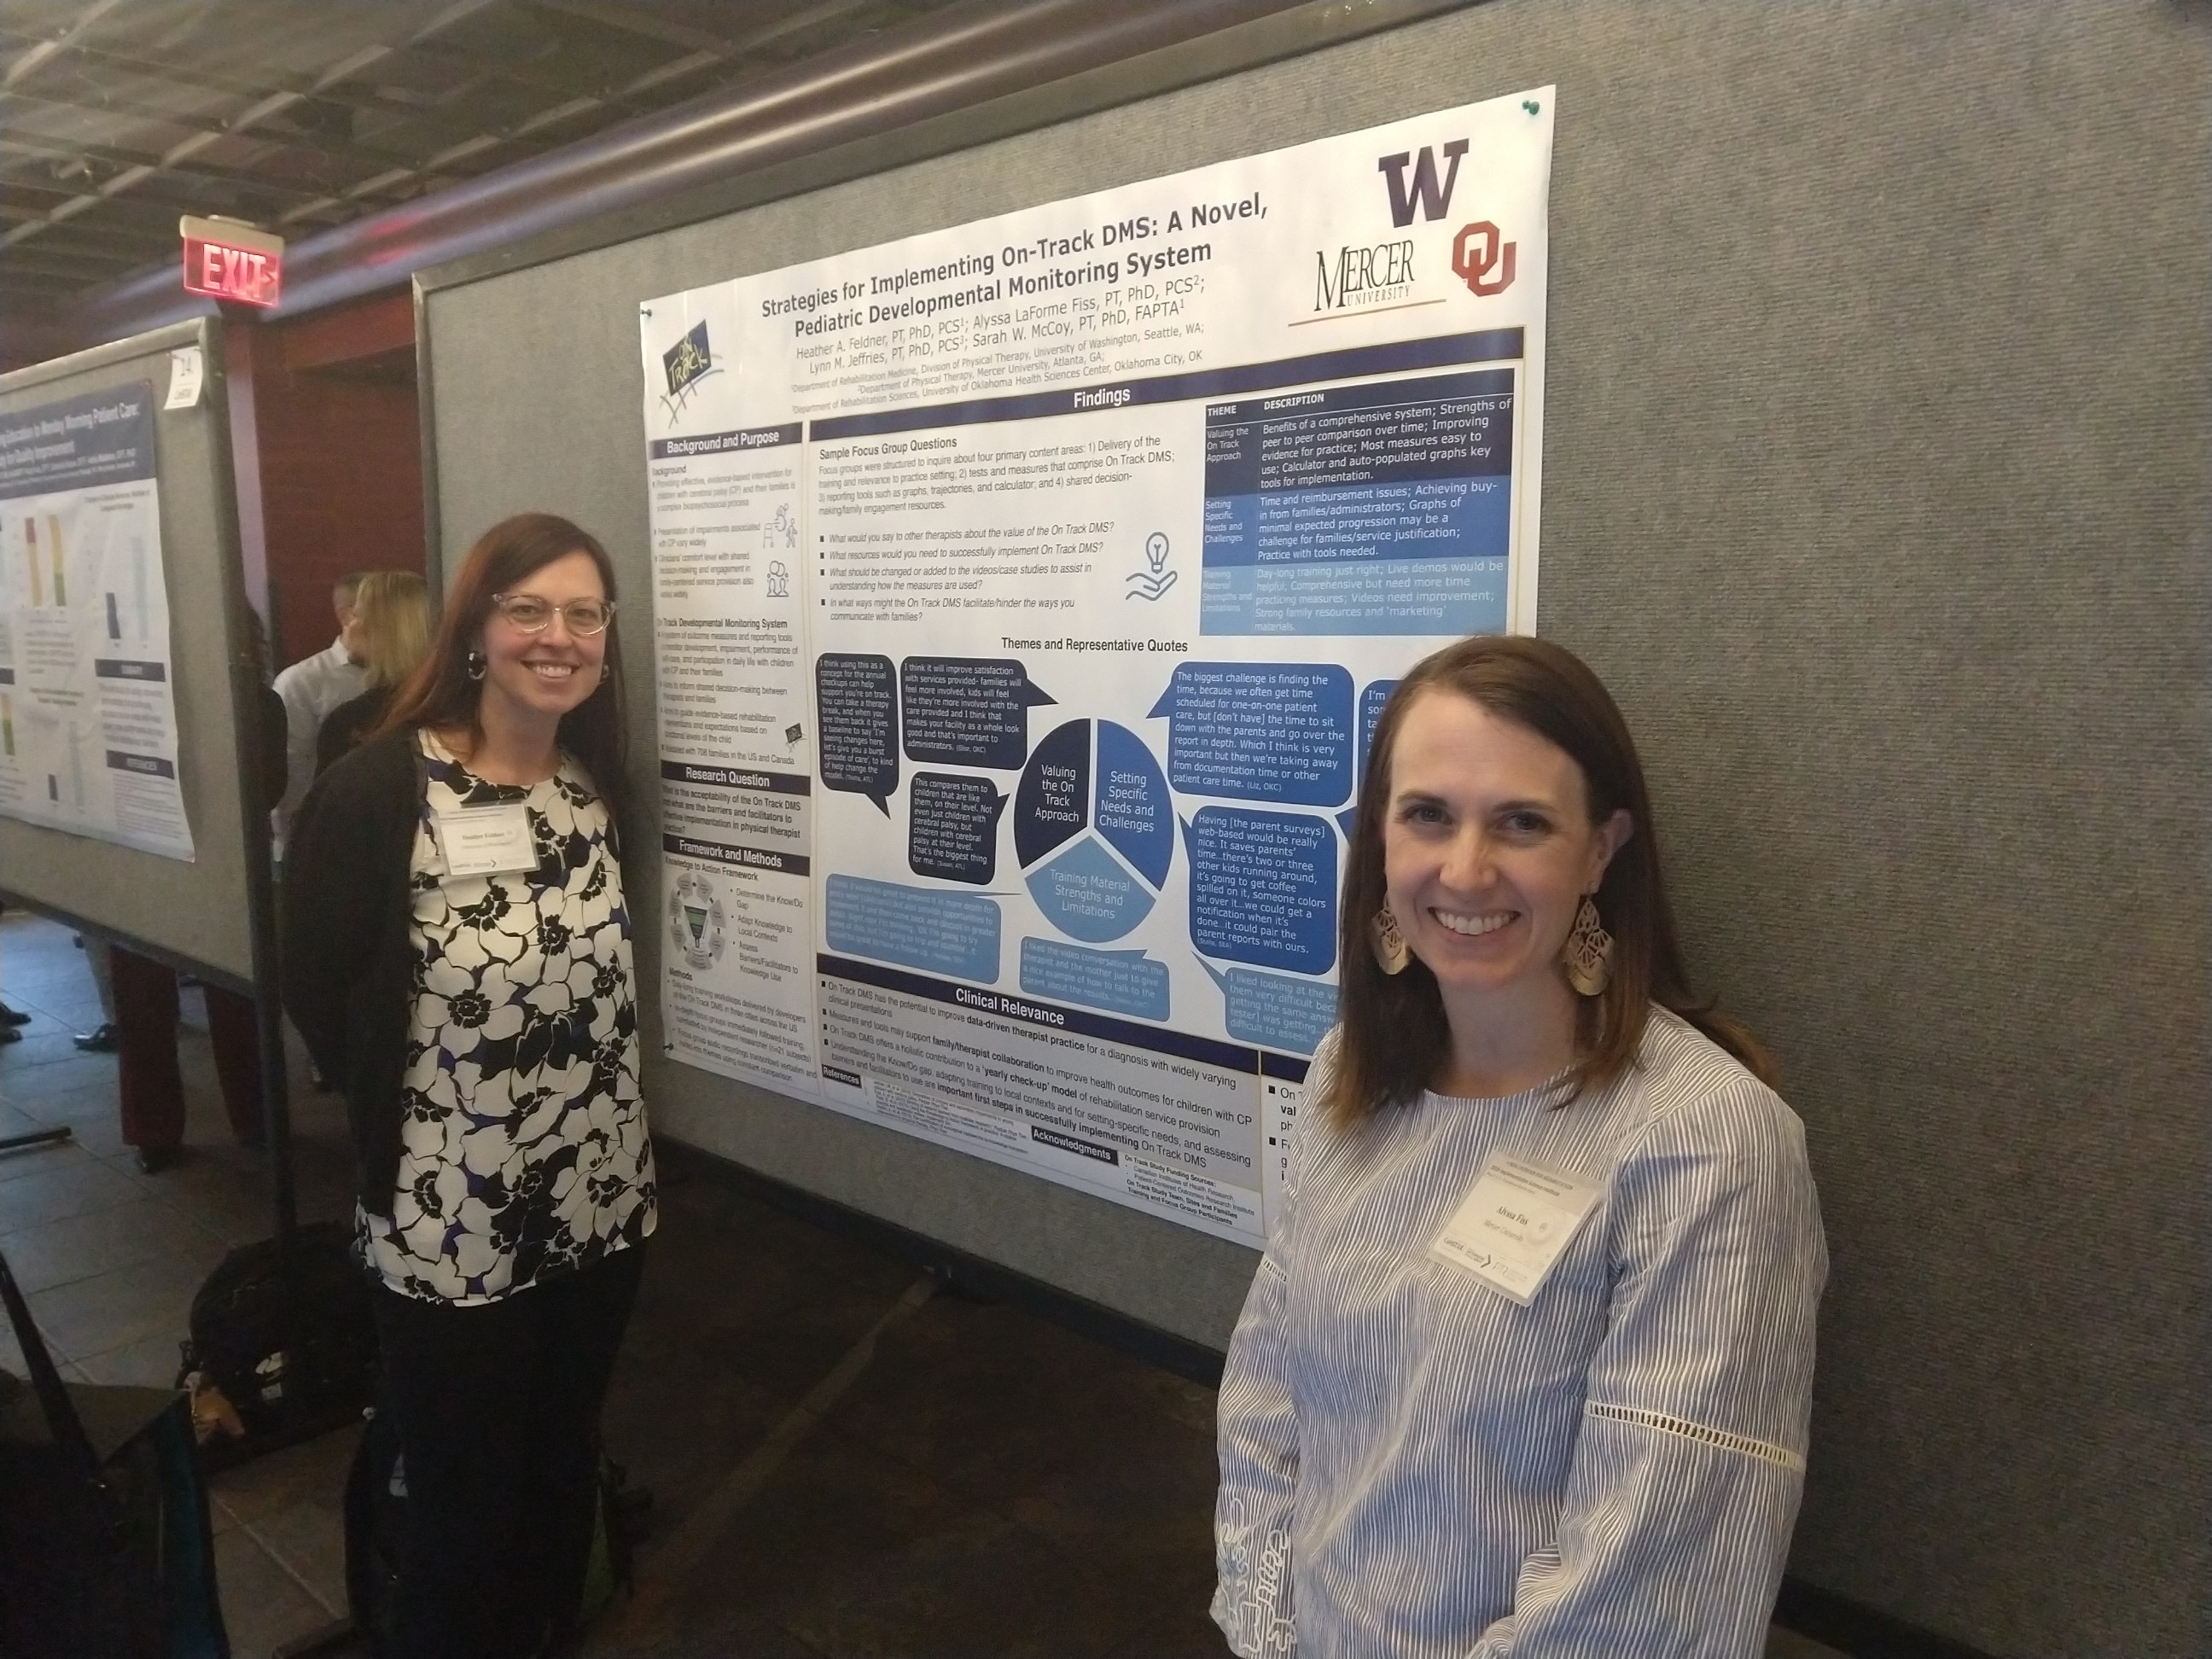 Two researchers, Heather Feldner and Alyssa LaForme Fiss, from Mercer University, stand in front of their research poster on implementation science.